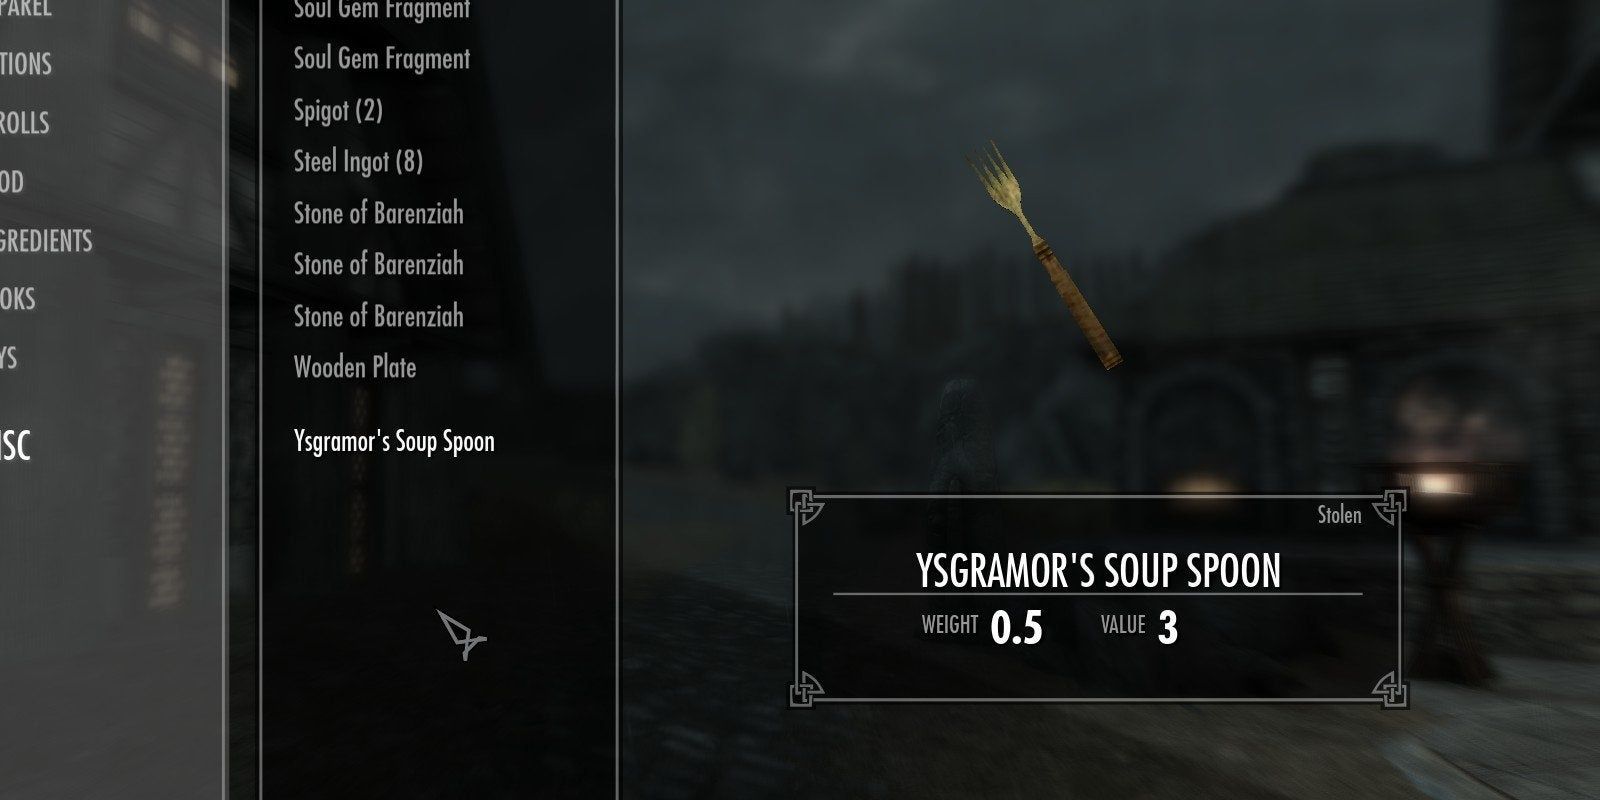 Ysgramor's Soup Spoon selected in the inventory